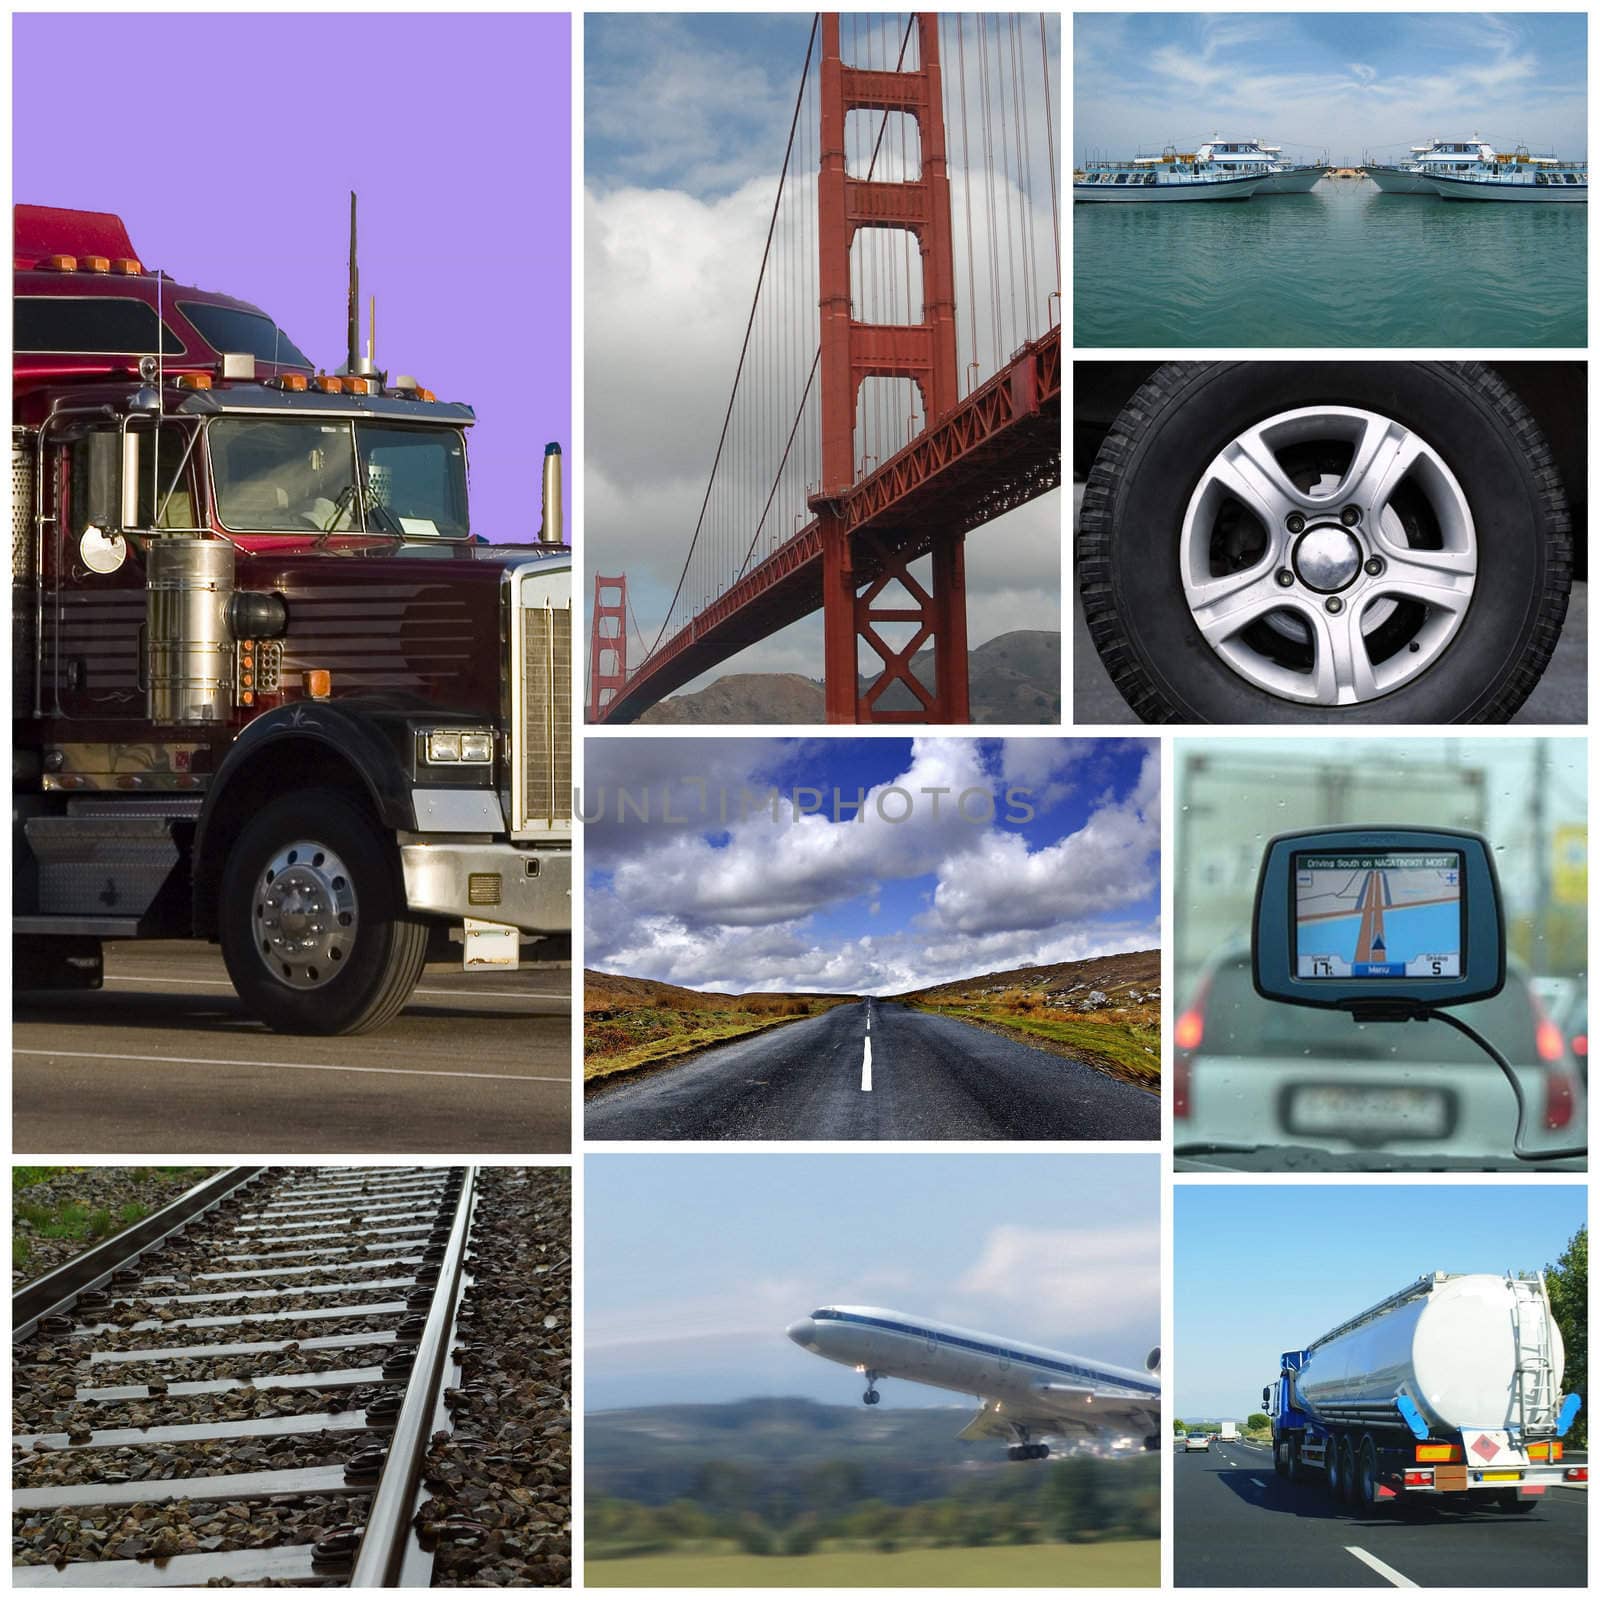 Transport themed collage or collection with different types of transport: trucks, airplane, car, boat, train.